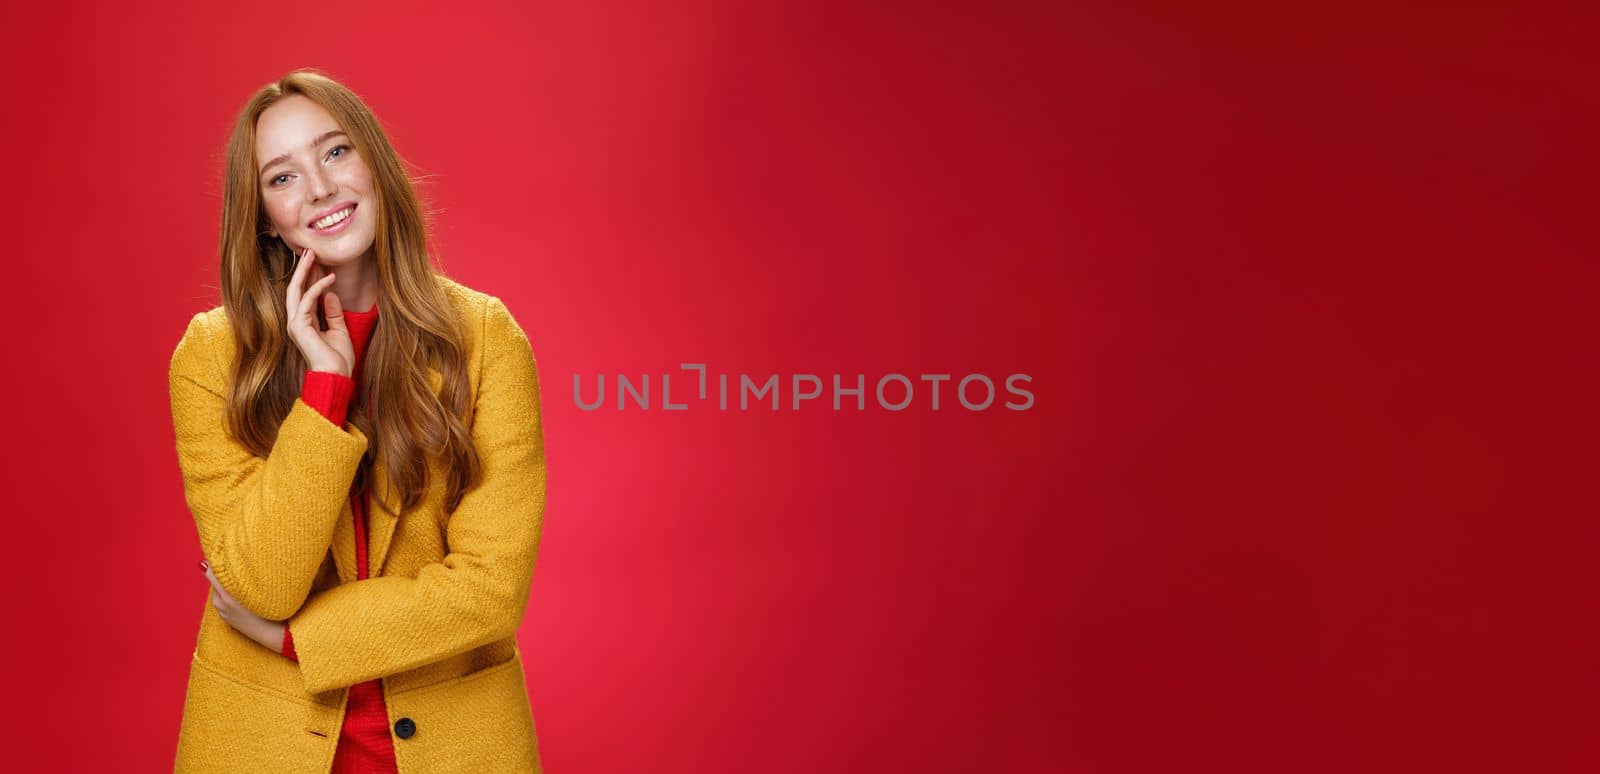 Good-looking carefree and happy relaxed redhead girlfriend in yellow stylish coat touching face and tilting head as smiling with positive emotions, posing cheerful against red background.